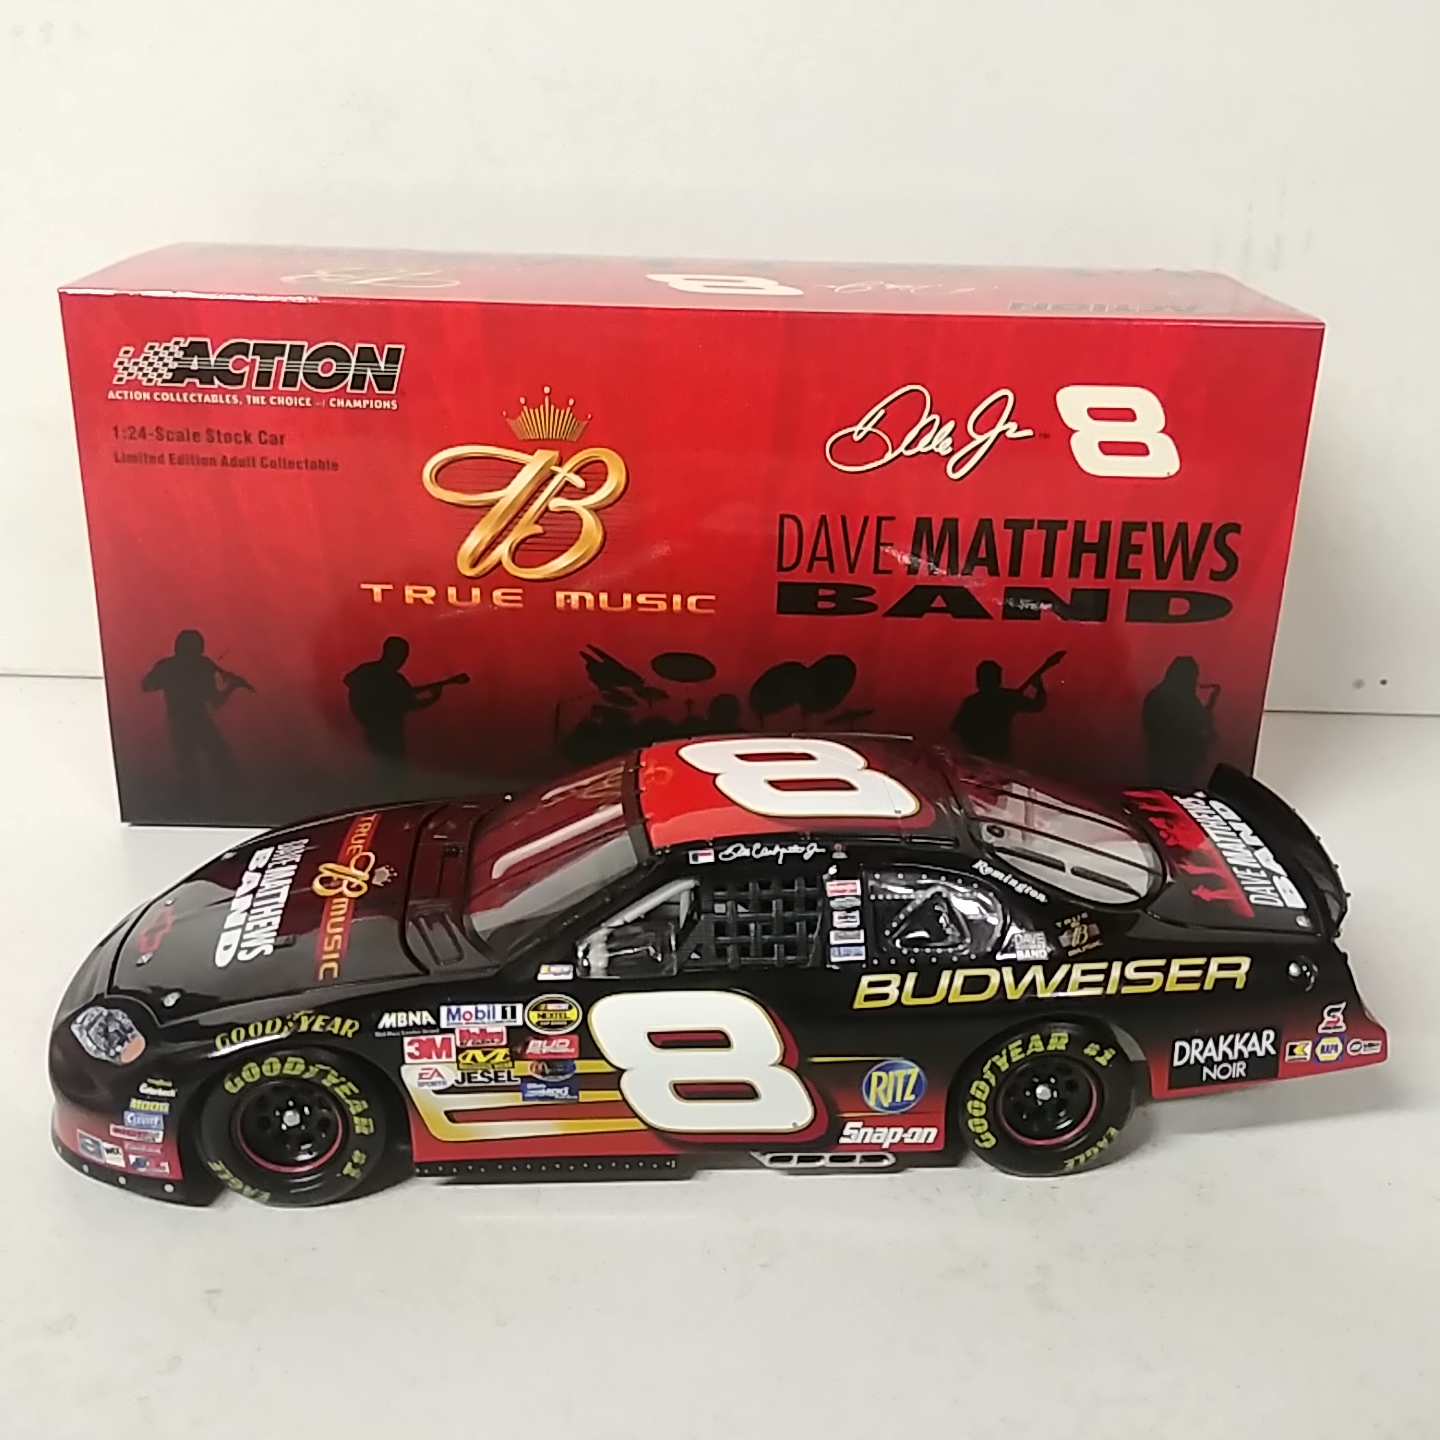 2004 Dale Earnhardt Jr 1/24th Budweiser "Chevy Rock and Roll" "Dave Matthews Band" c/w car